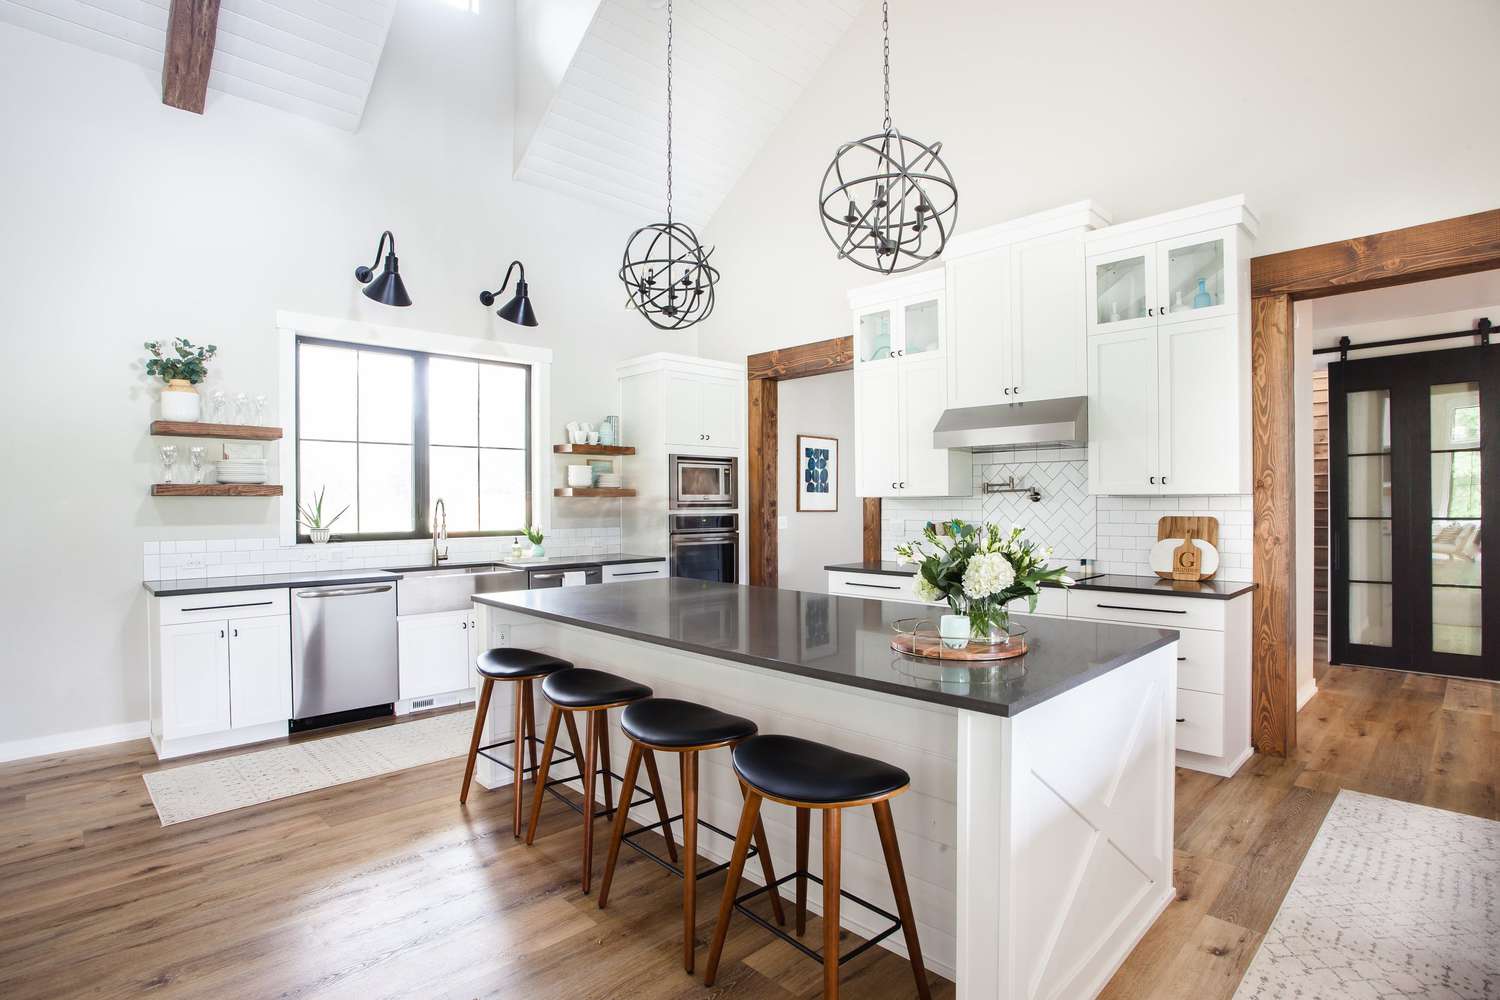 How Do You Transition to Modern Farmhouse